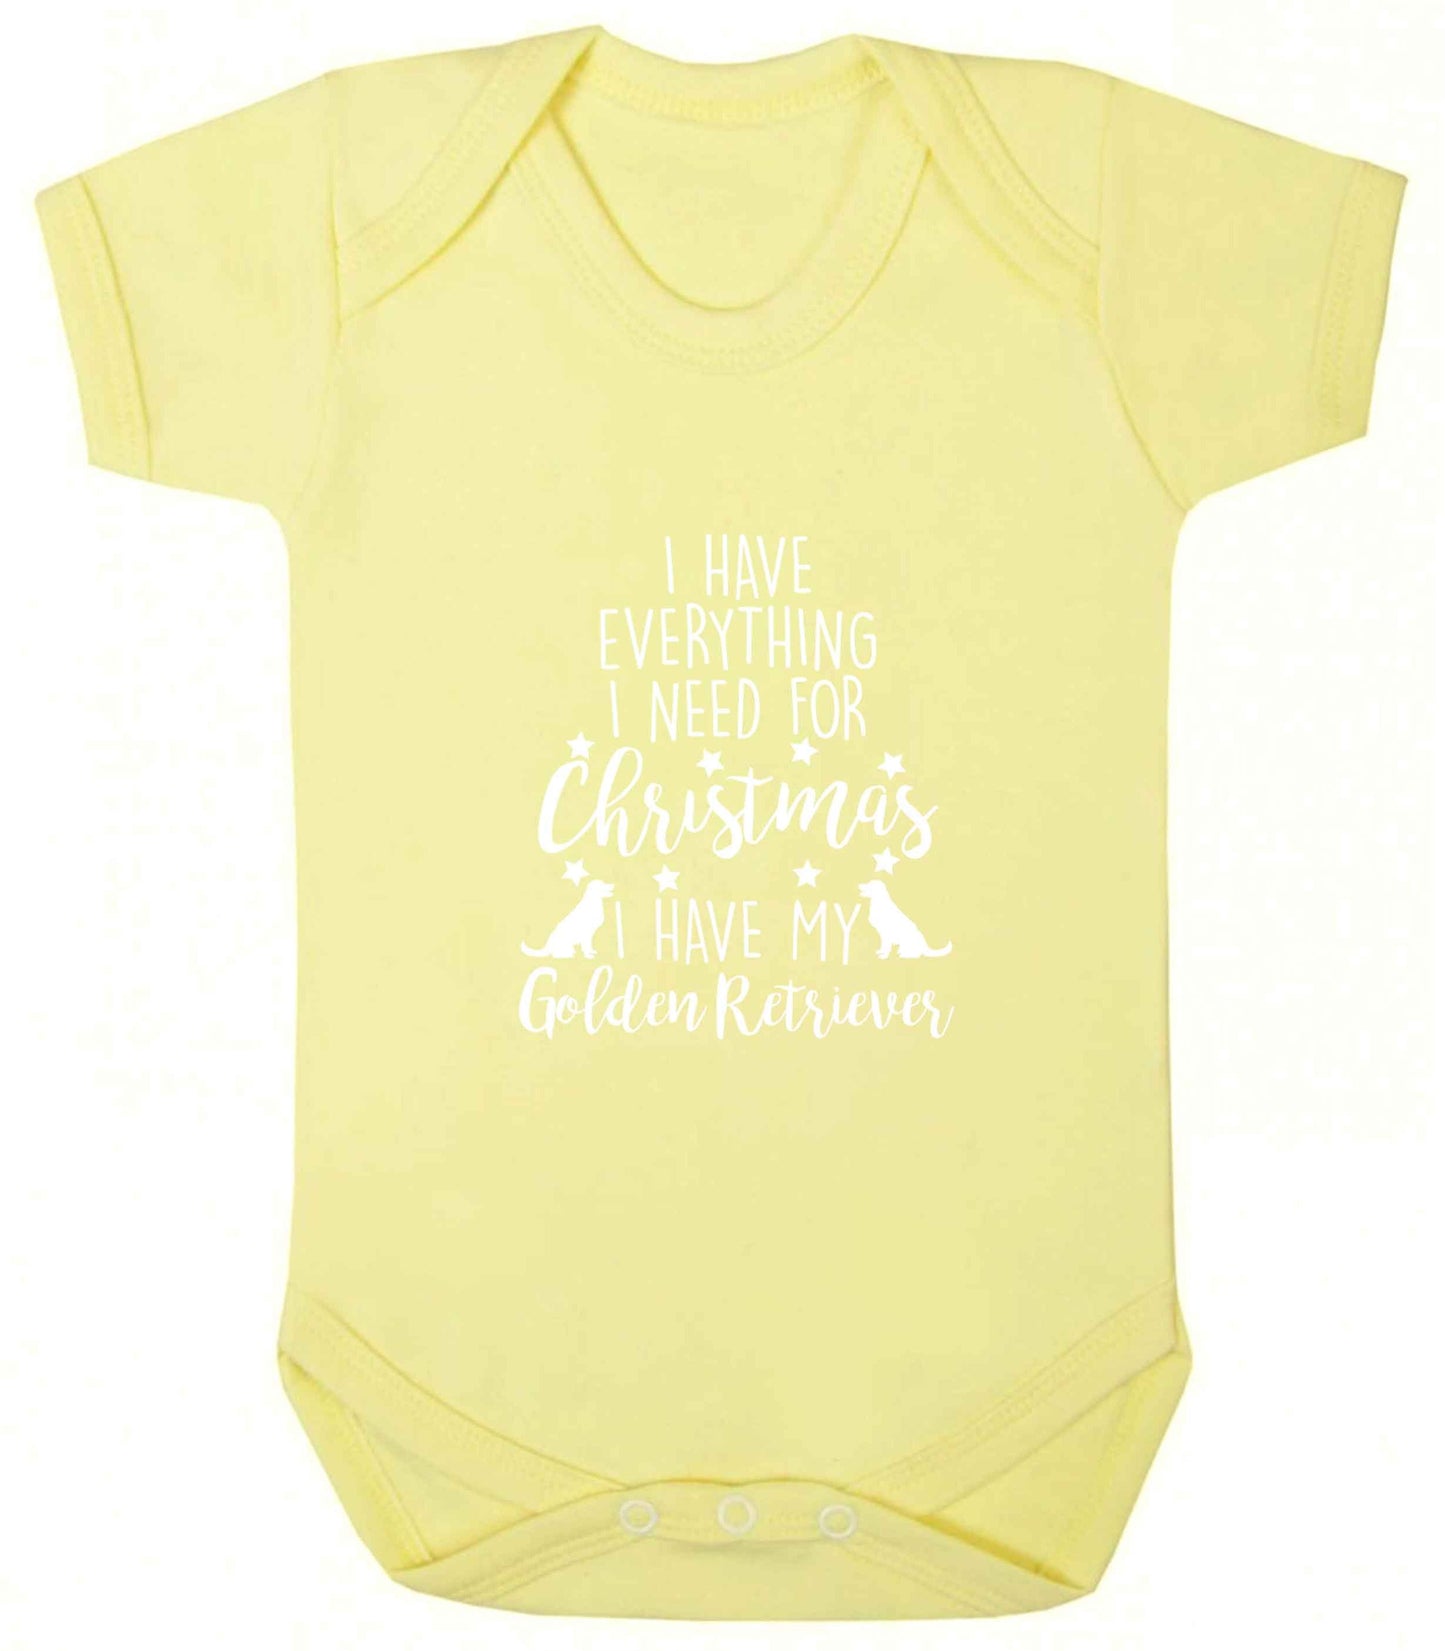 I have everything I need for Christmas I have my golden retriever baby vest pale yellow 18-24 months